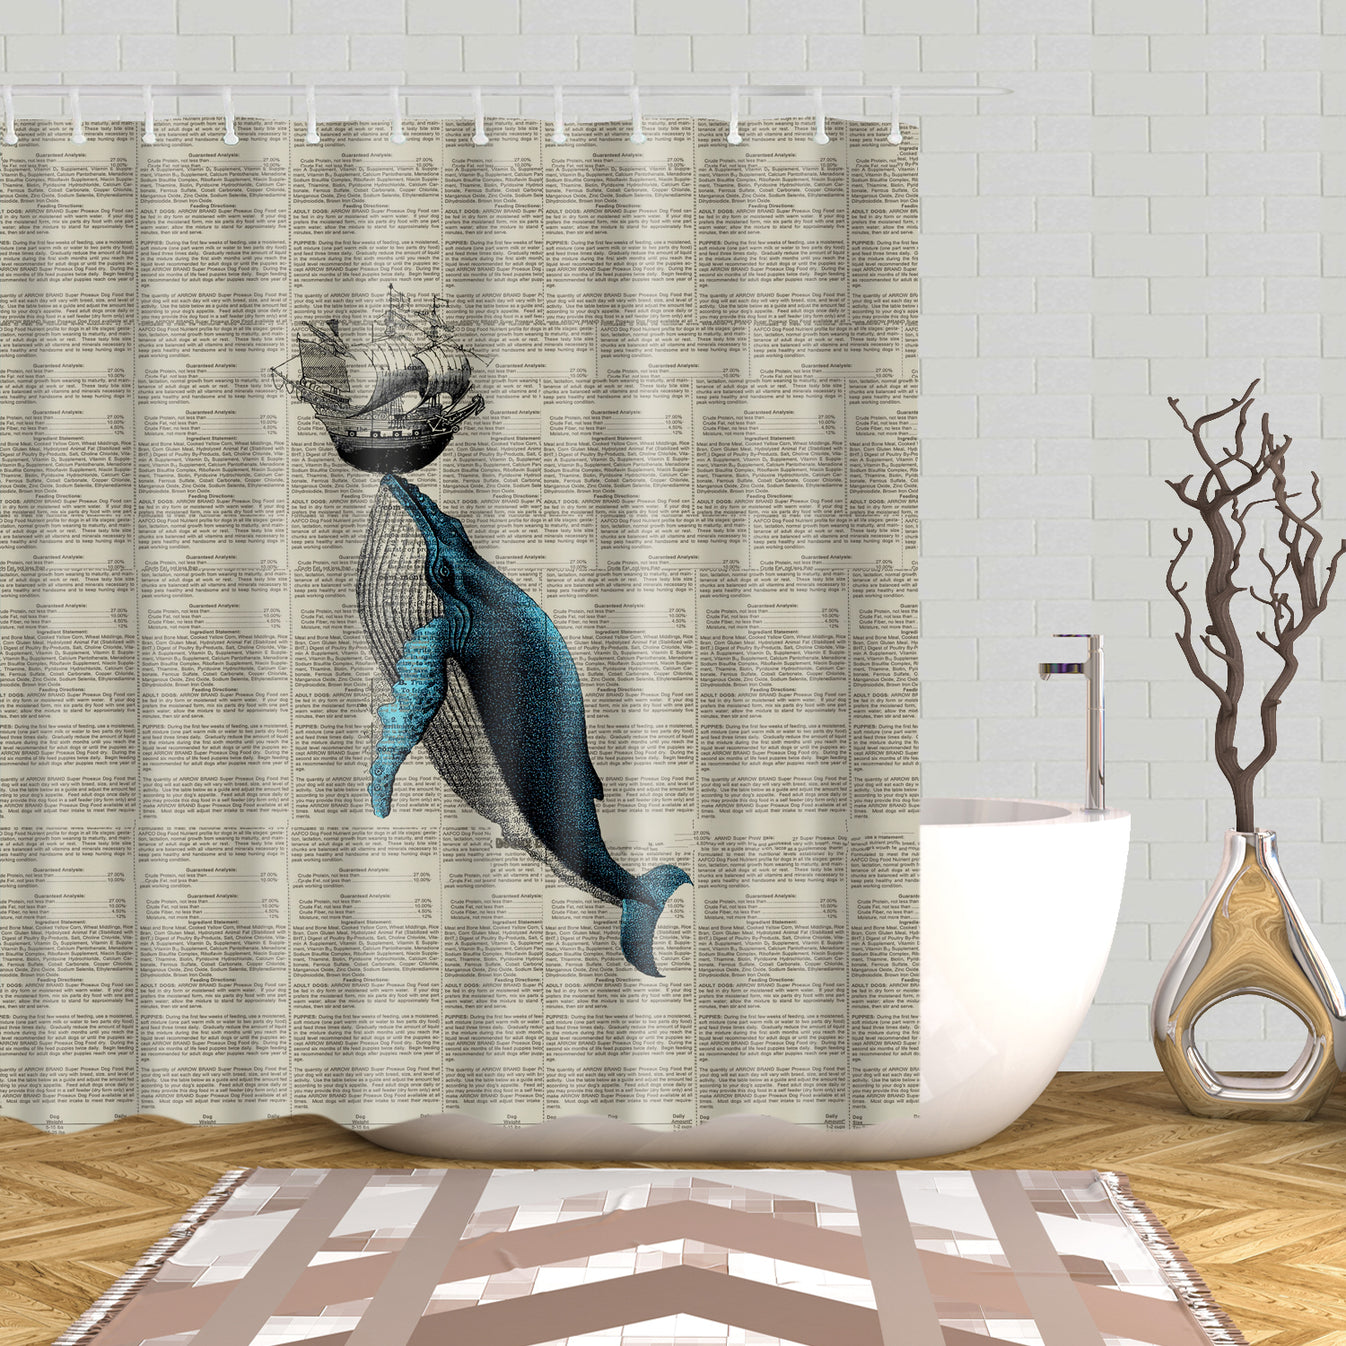 Navy Humpback Whale Shower Curtain, Hit Boat, Newspaper Backdrop ...